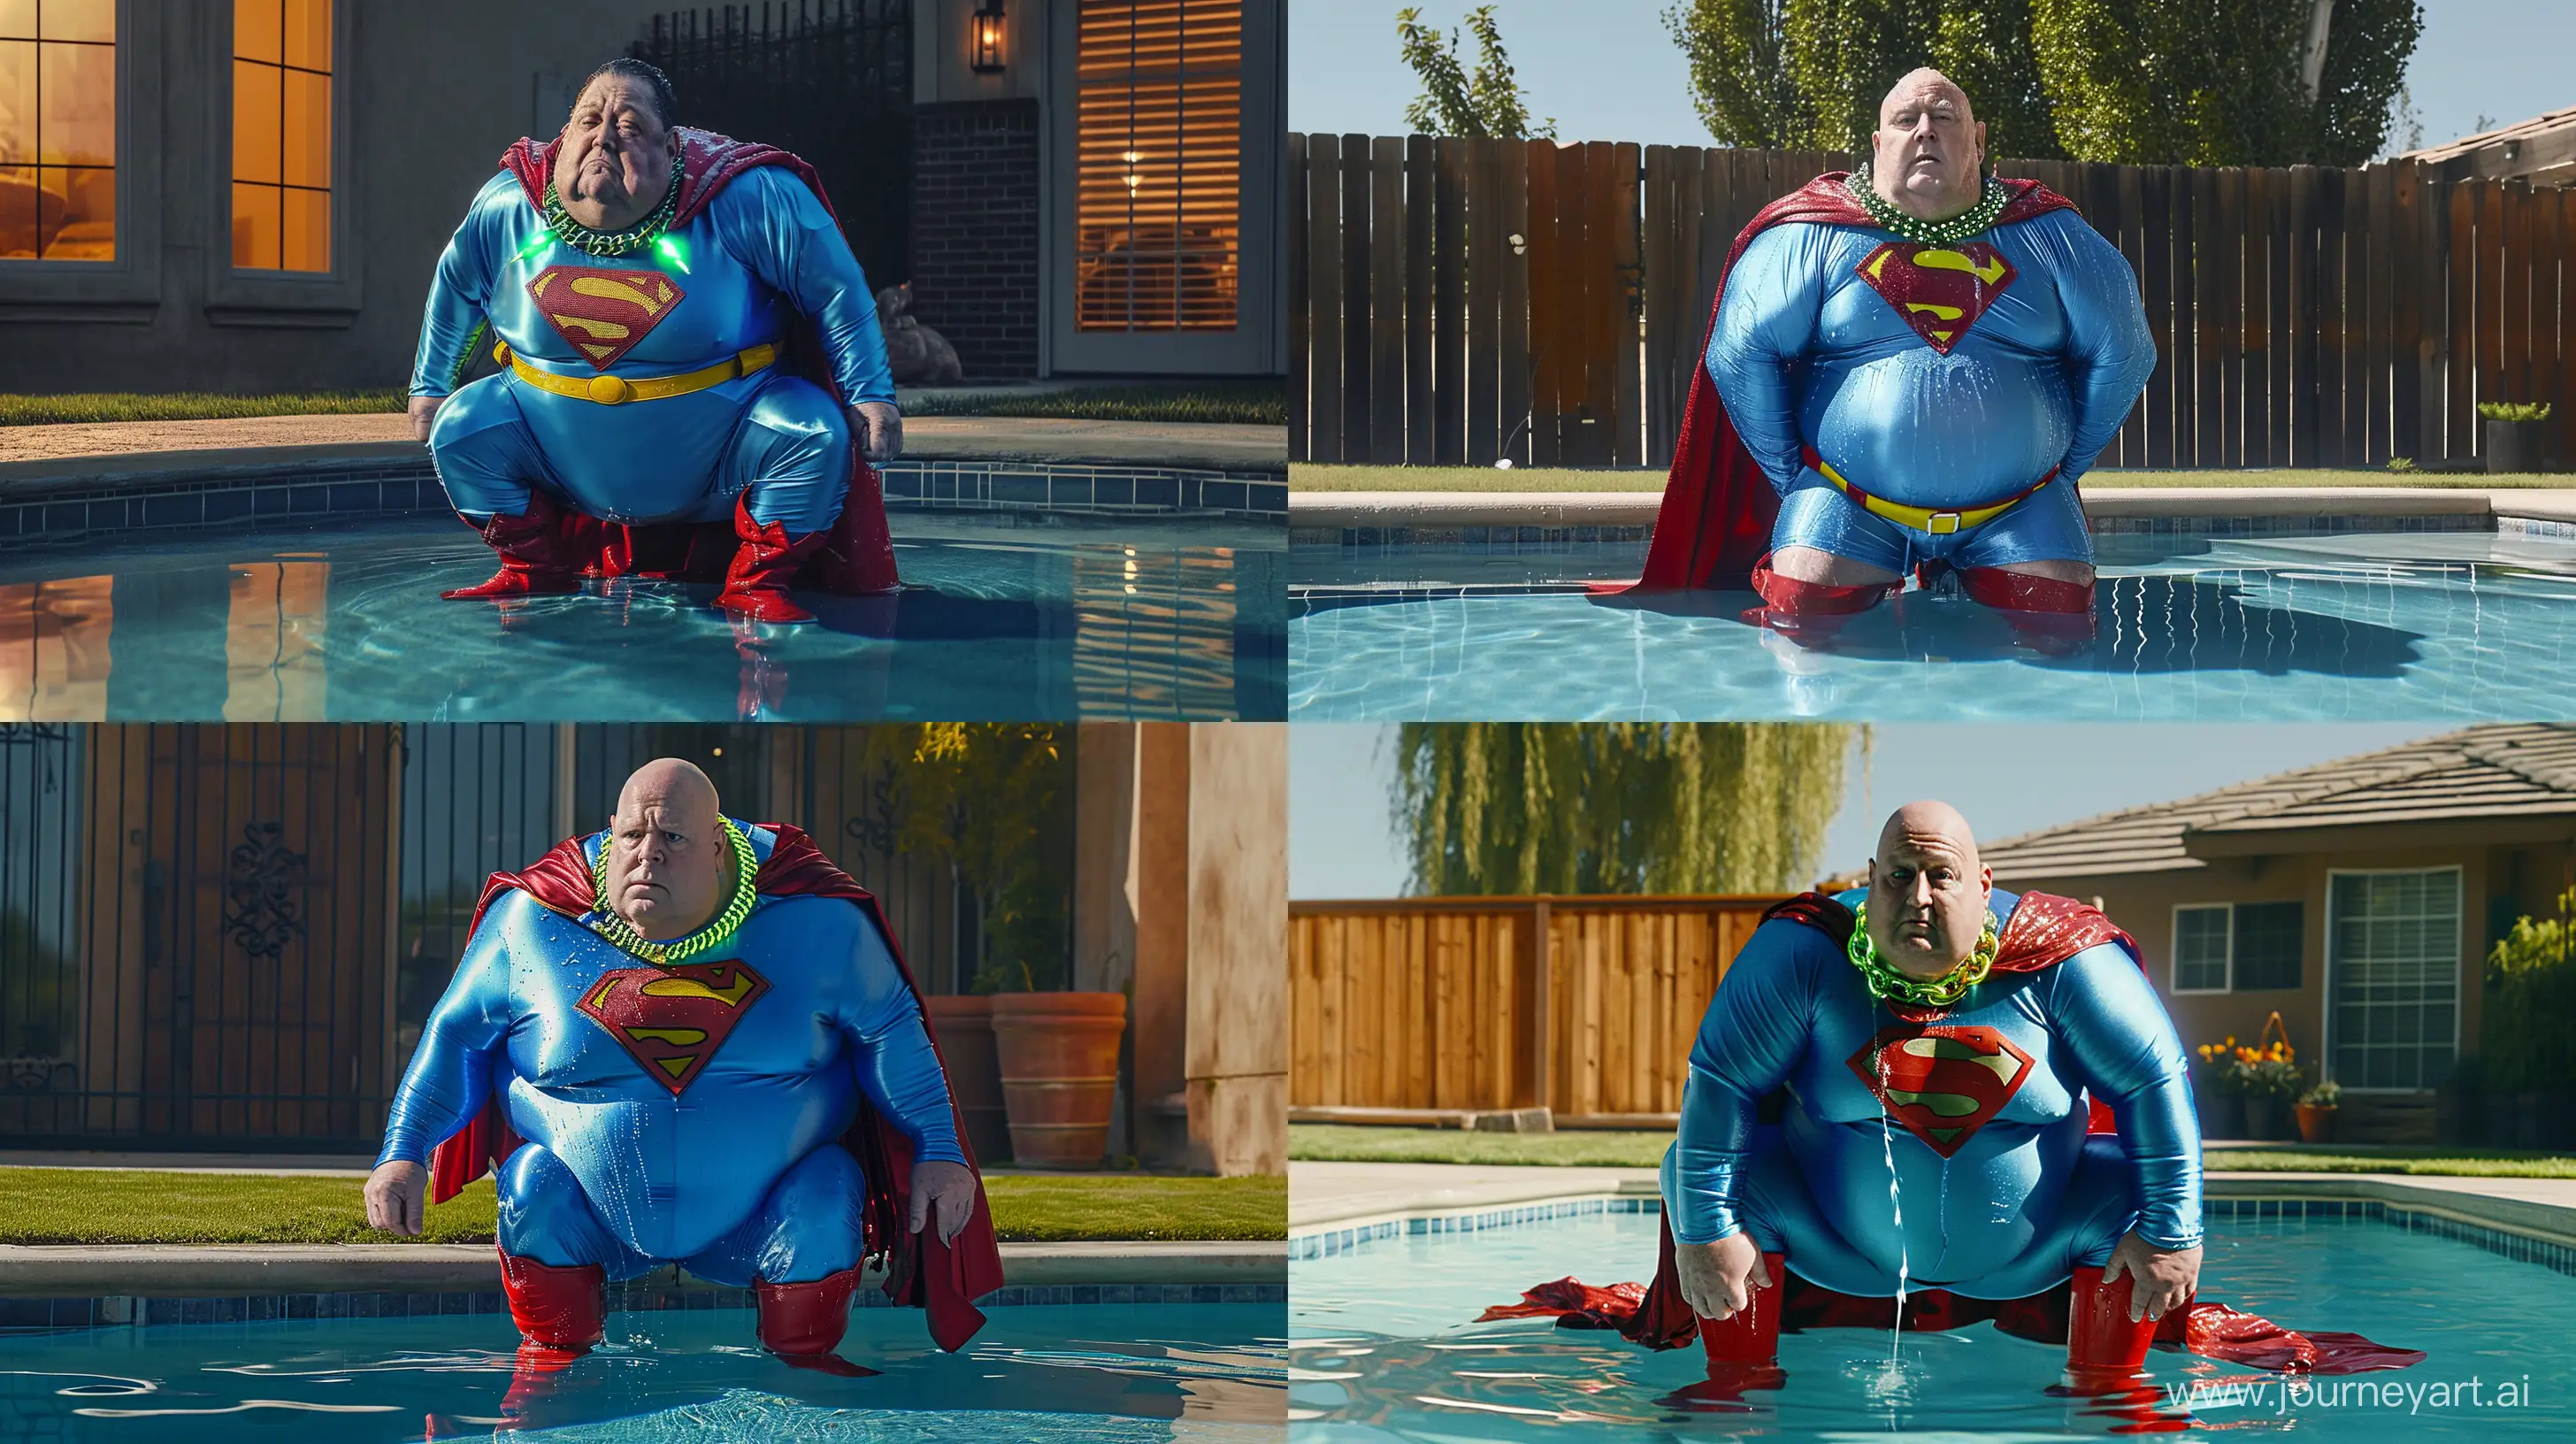 Elderly-Superman-Enjoys-Playful-Pool-Time-with-Unique-Costume